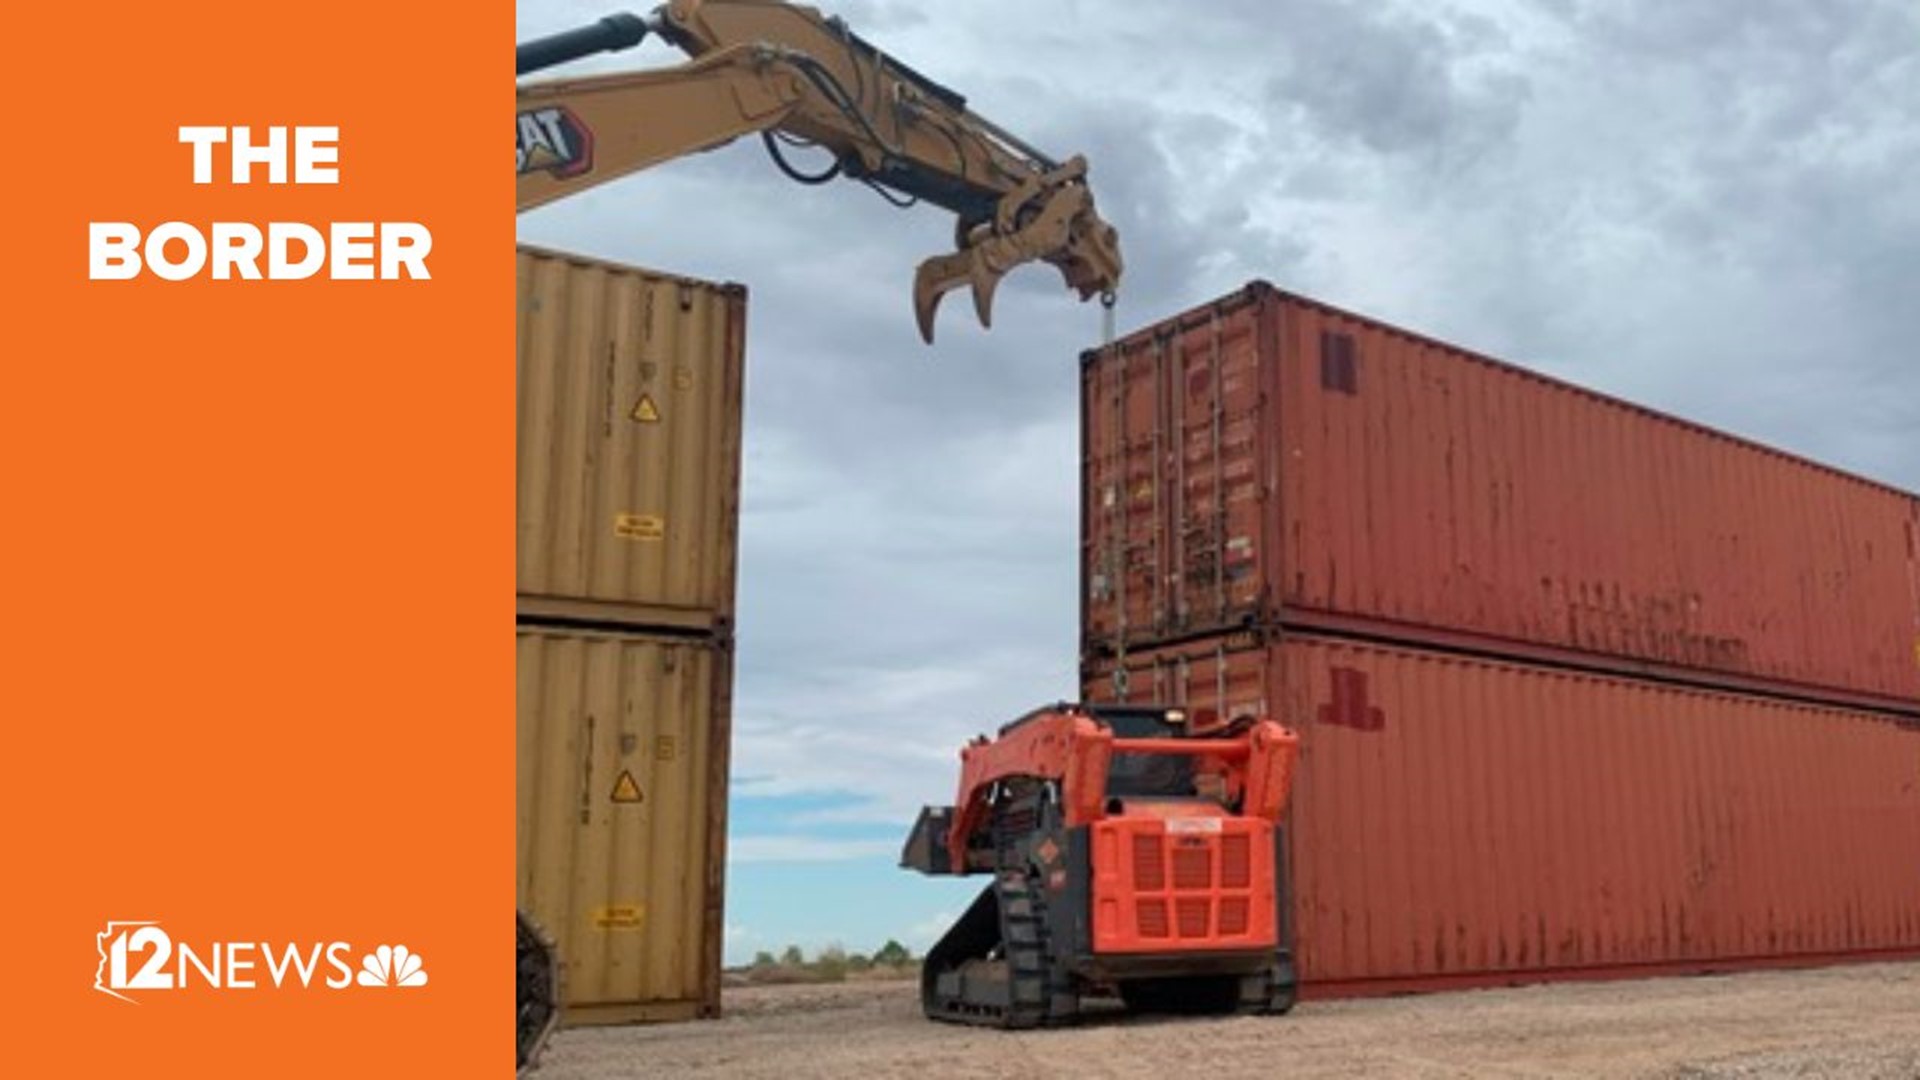 According to court documents released Wednesday, Arizona will stop putting up shipping containers along the border within the Coronado National Forest.